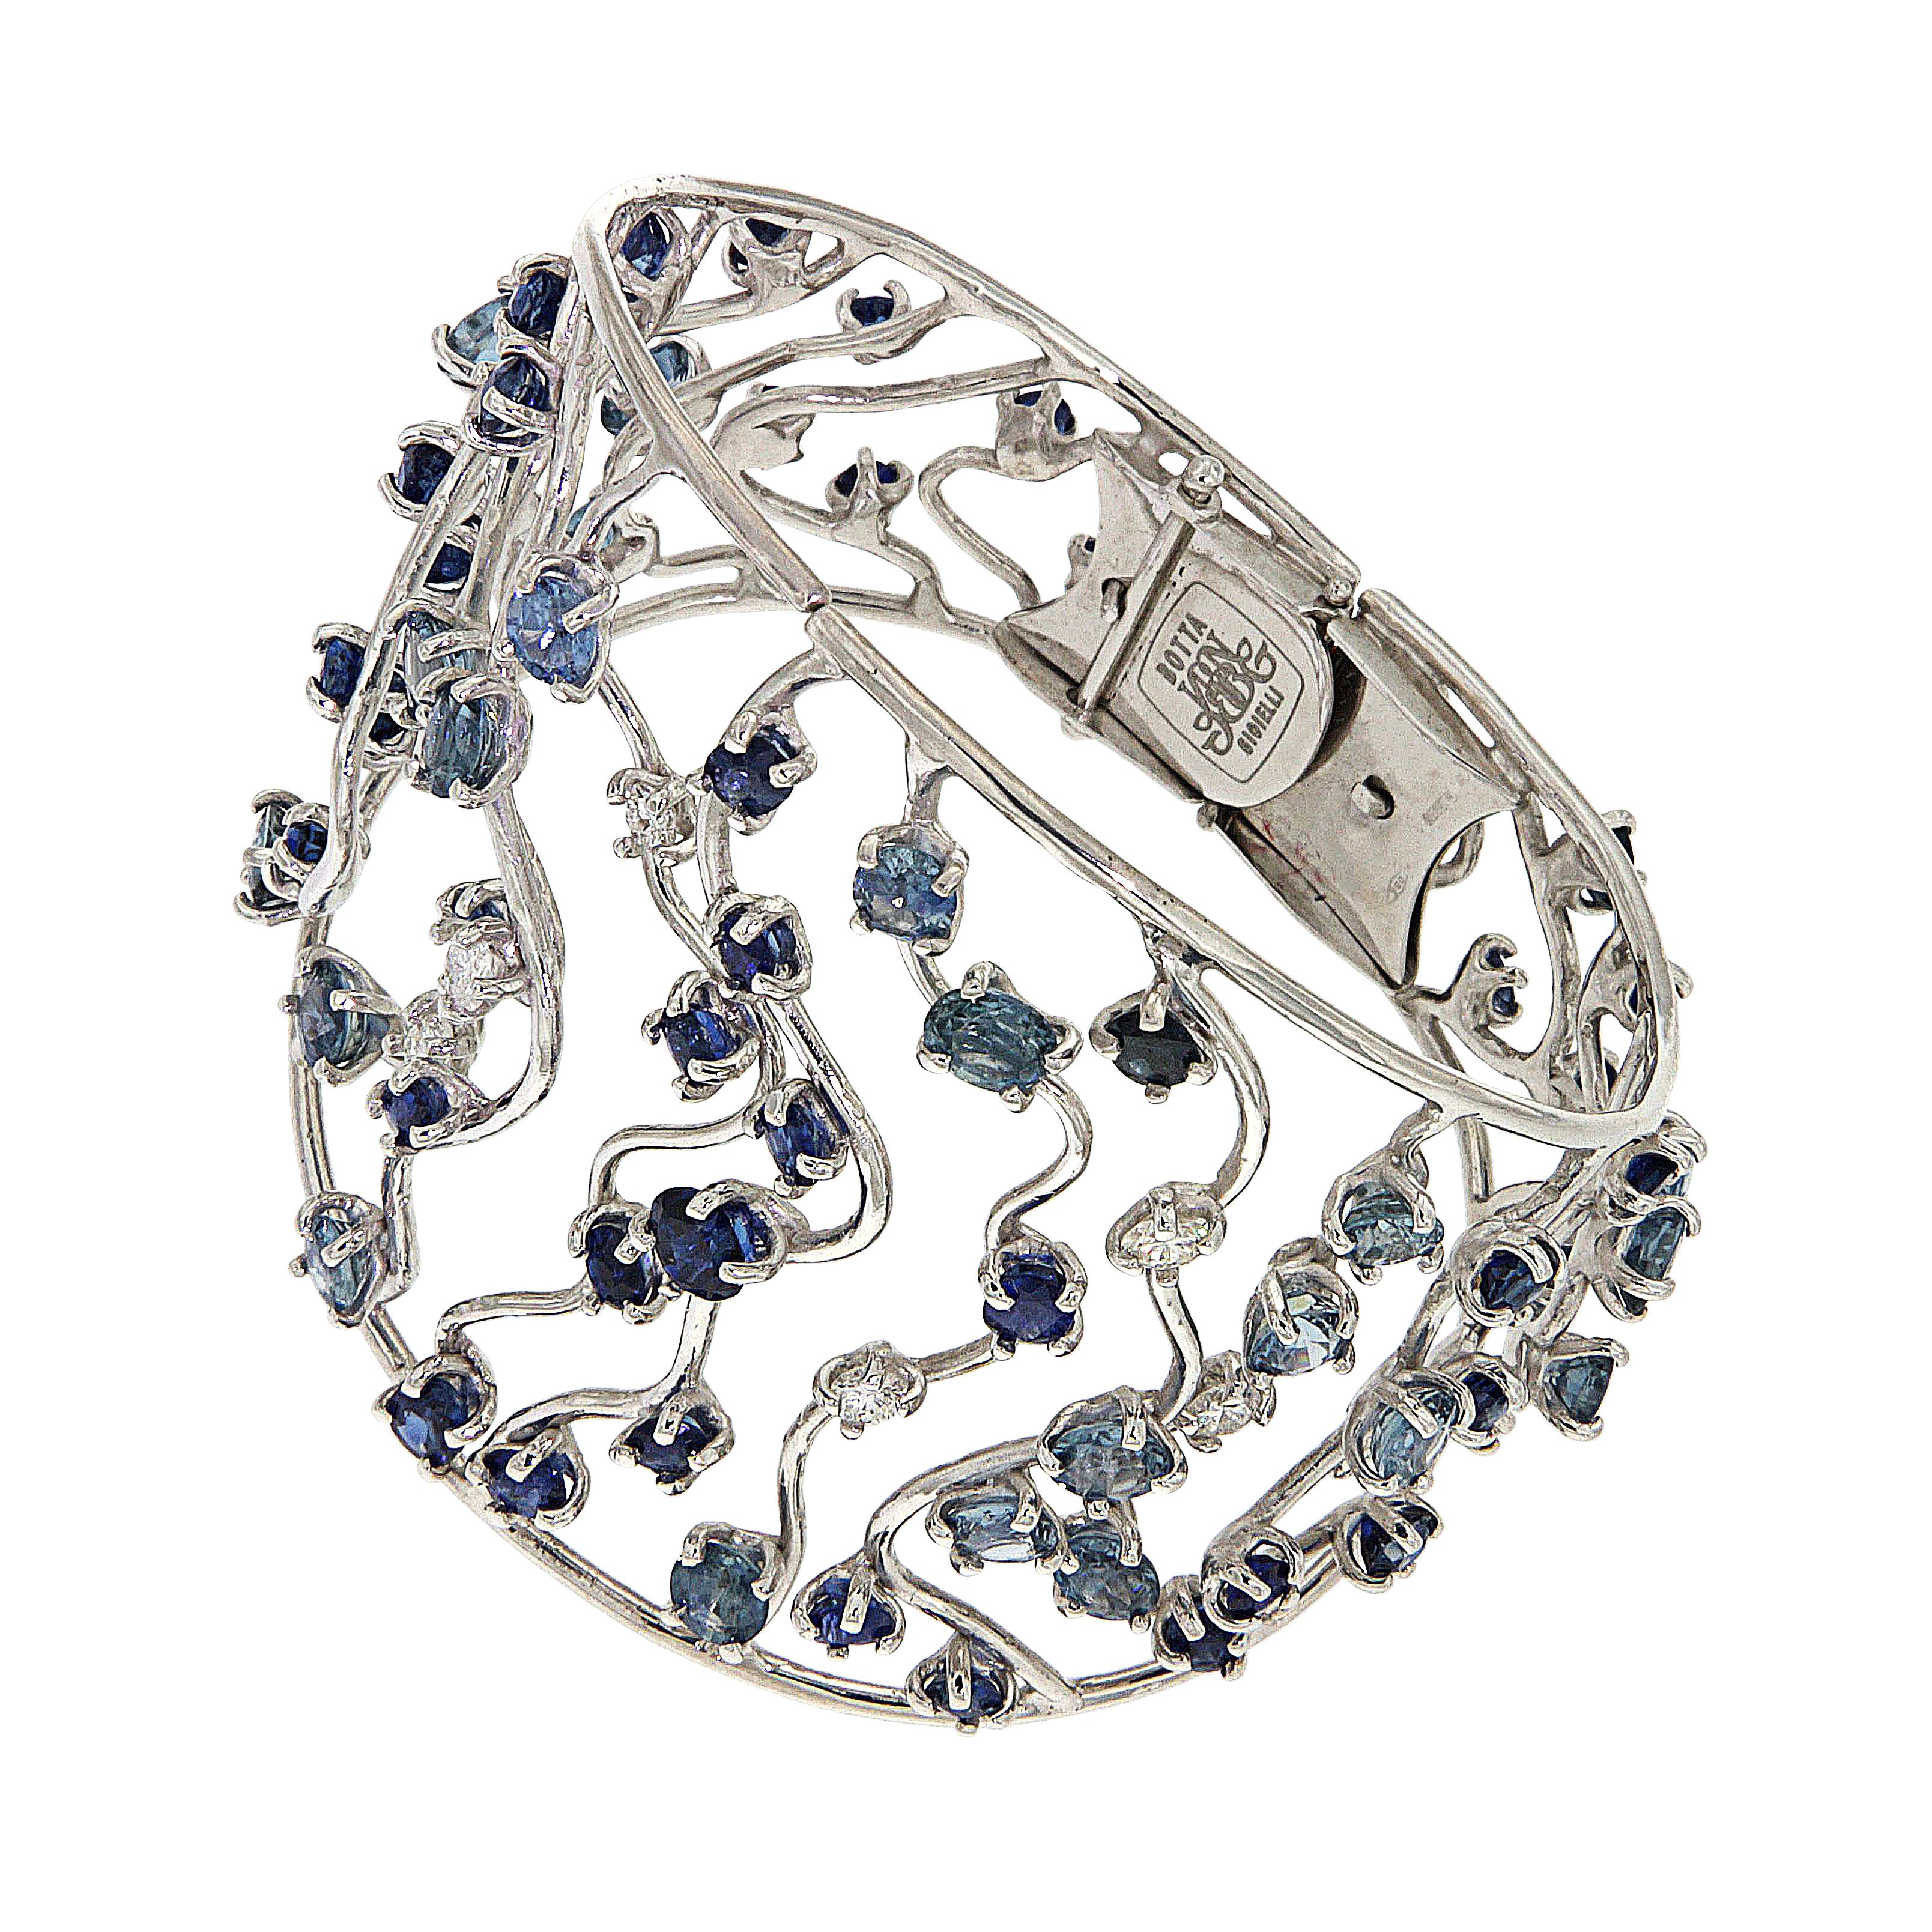 Brilliant Cut Blue Sapphires Diamonds 18 Karat White Gold  Waves Cuff Bracelet Made In Italy For Sale